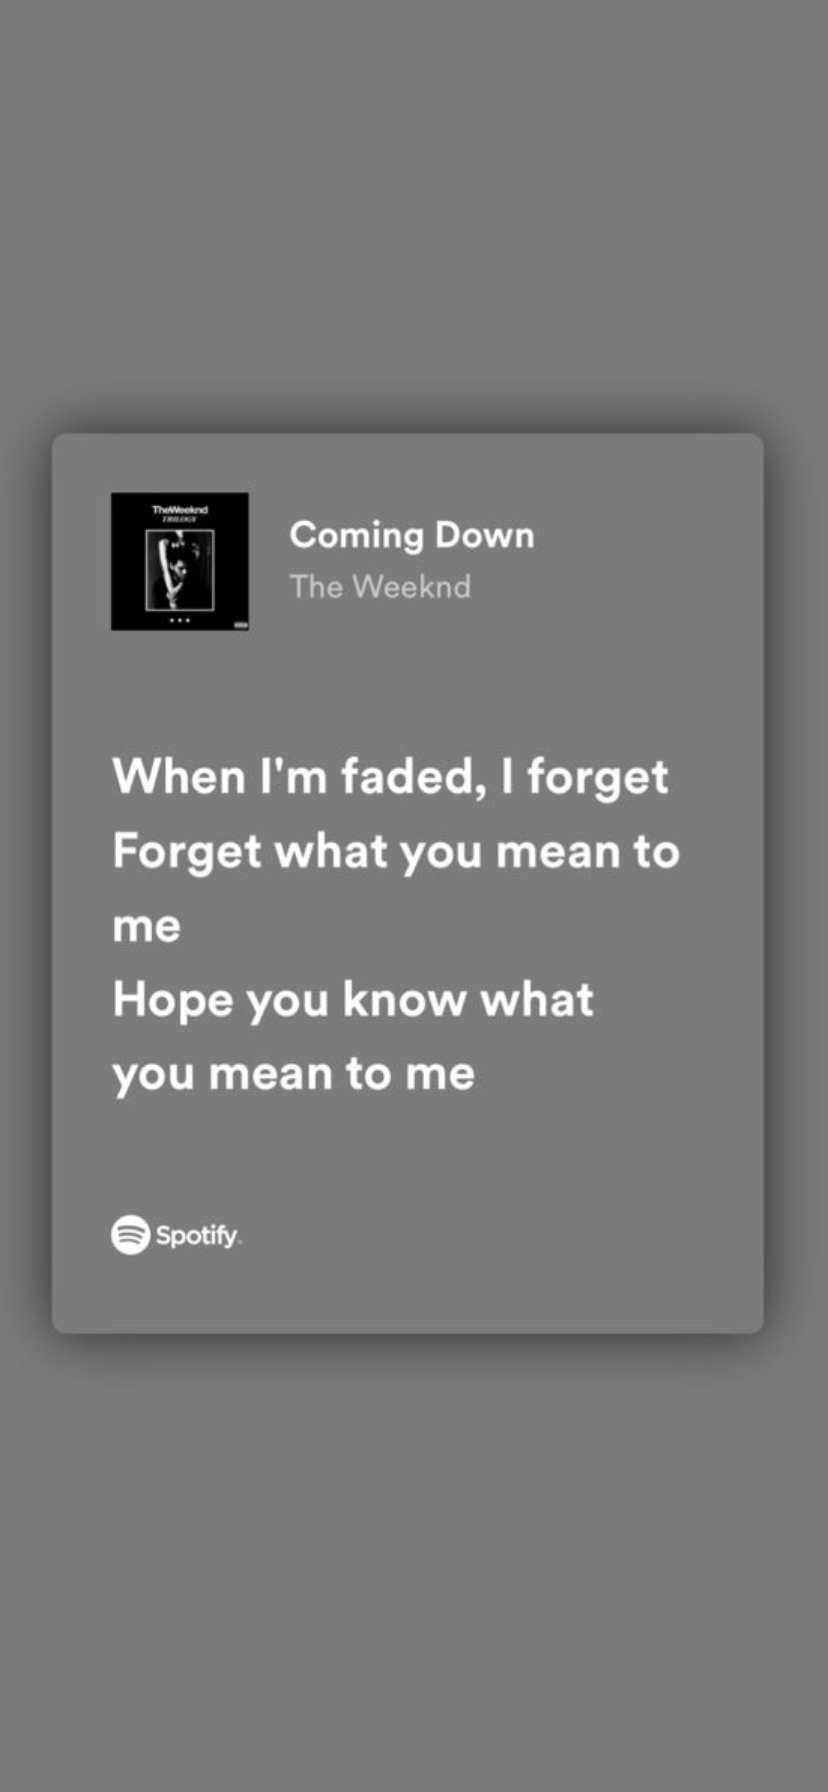 A screenshot of the coming down app - Spotify